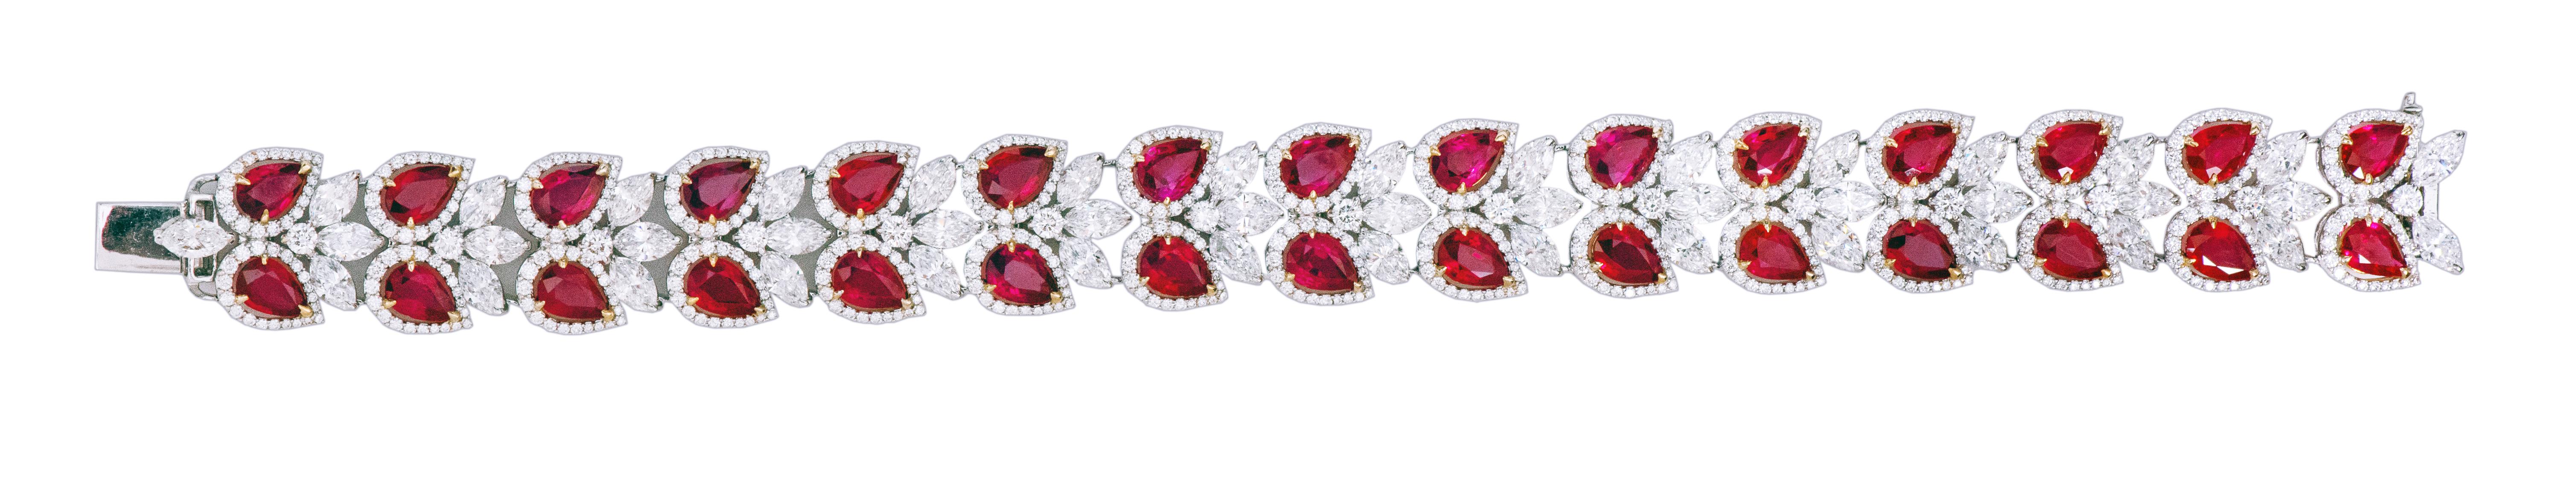 18 Karat Gold 26.22 Carat Ruby and Diamond Cocktail Statement Tennis Bracelet

This incredulous blood-red ruby and diamond solitaire broad flexible bracelet is impressive. The solitaire pear-shaped ruby is surrounded by a single row of slightly